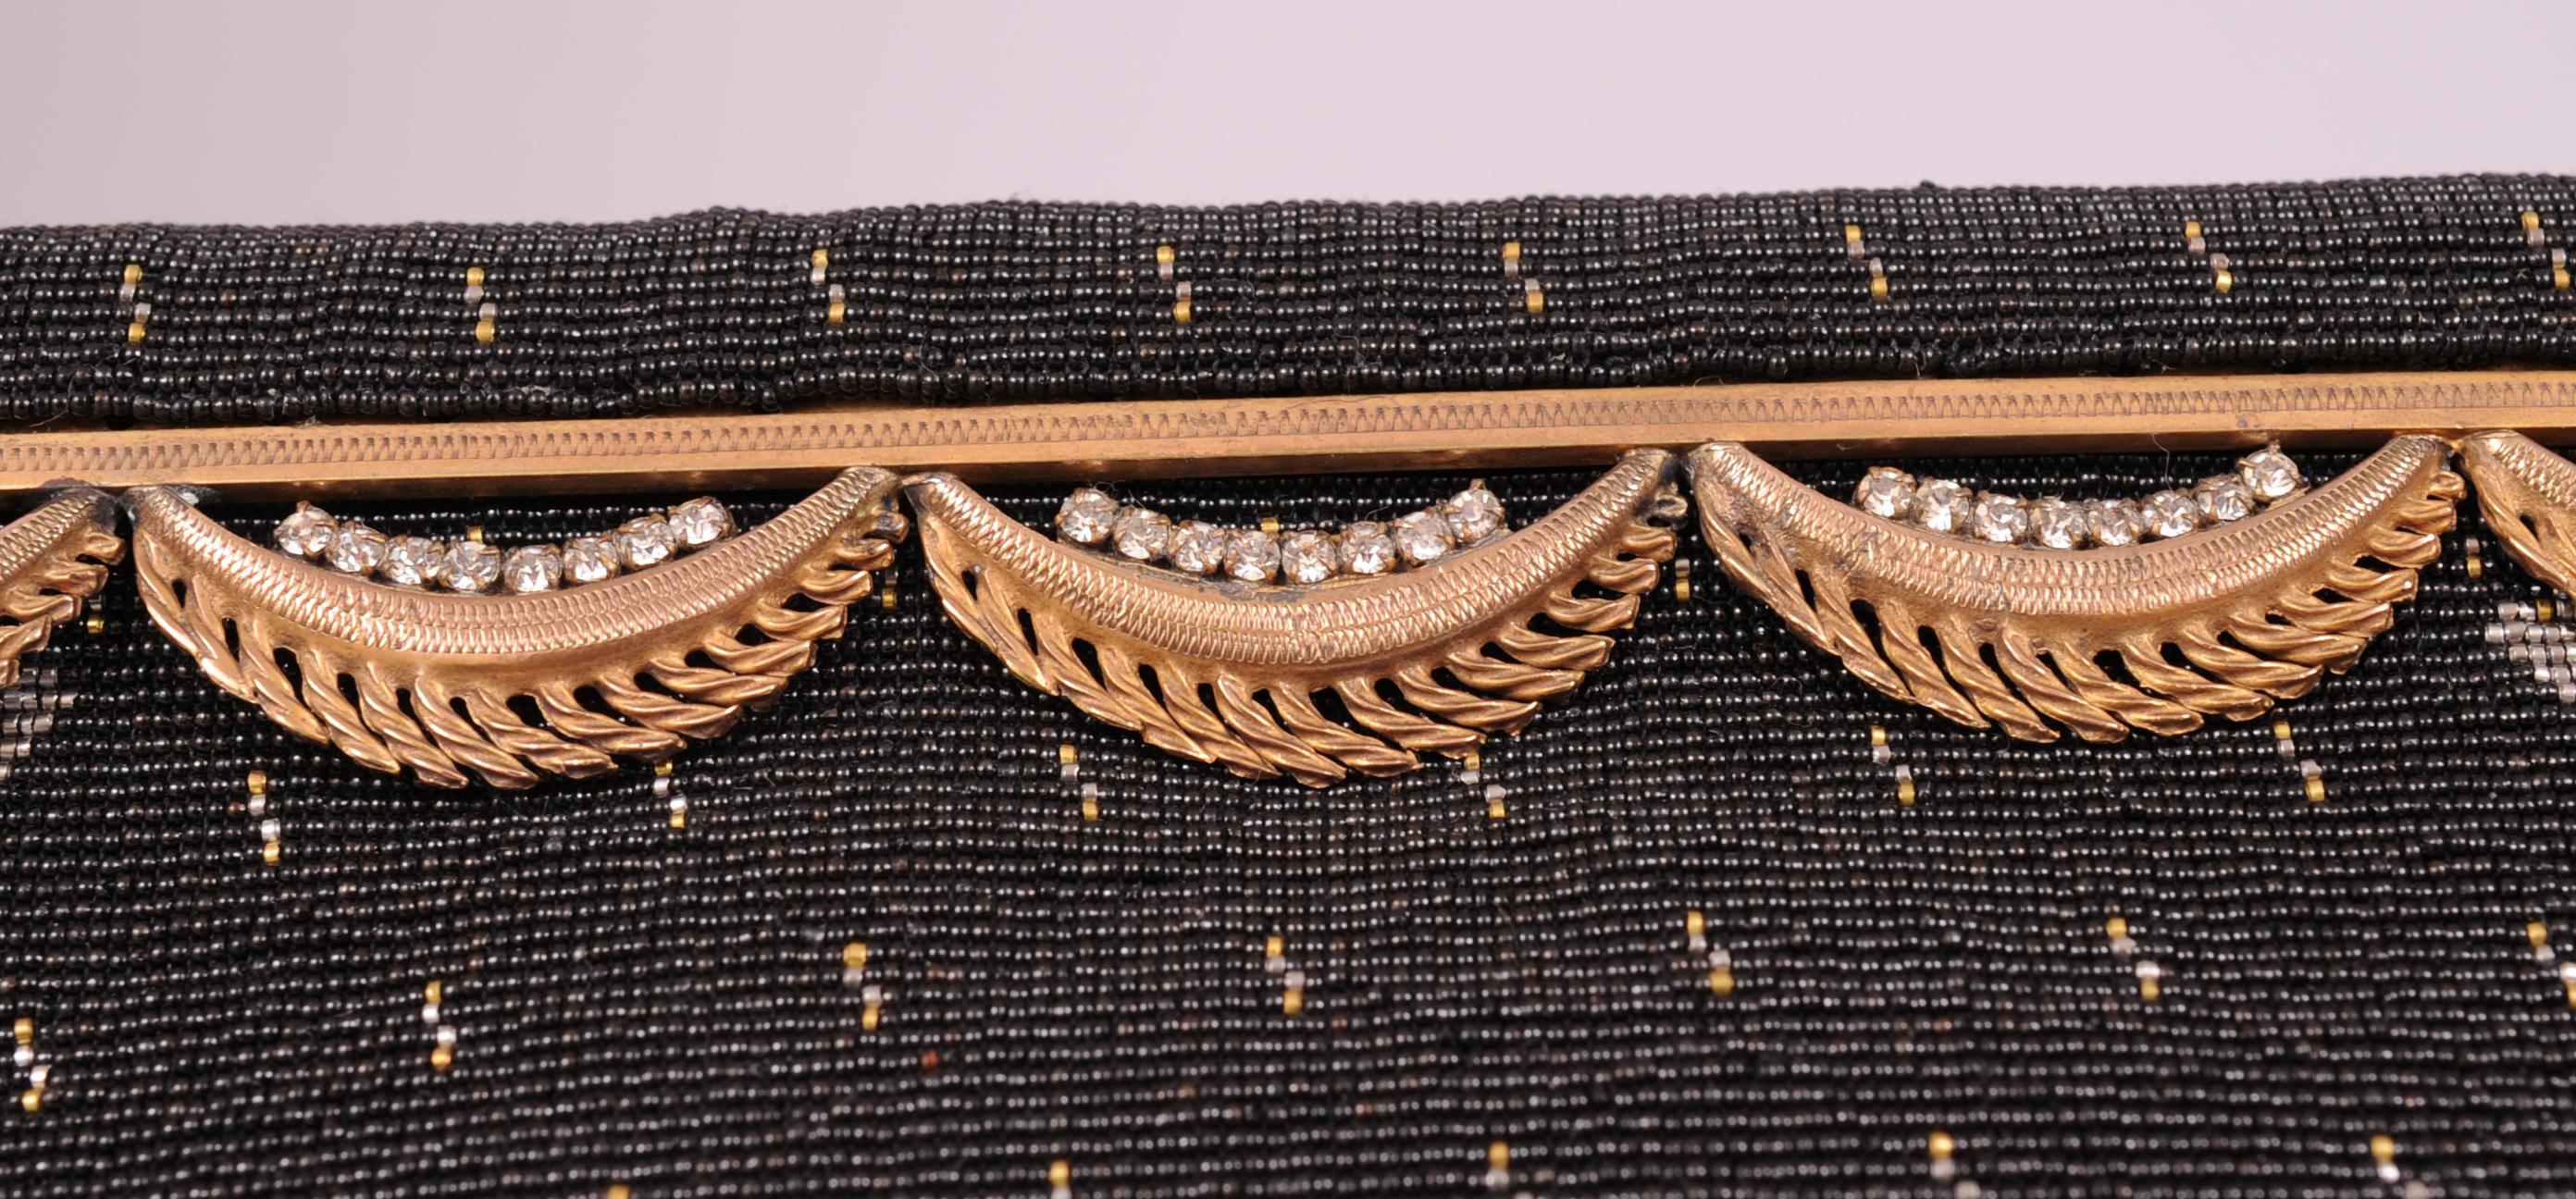 Langlois & Jargeais< Paris are the creators of this stunning black beaded  evening bag. The workmanship is truly breathtaking. The very smallest micro beads are used in shades of black, gold, silver and copper all done by hand in France. The bag has